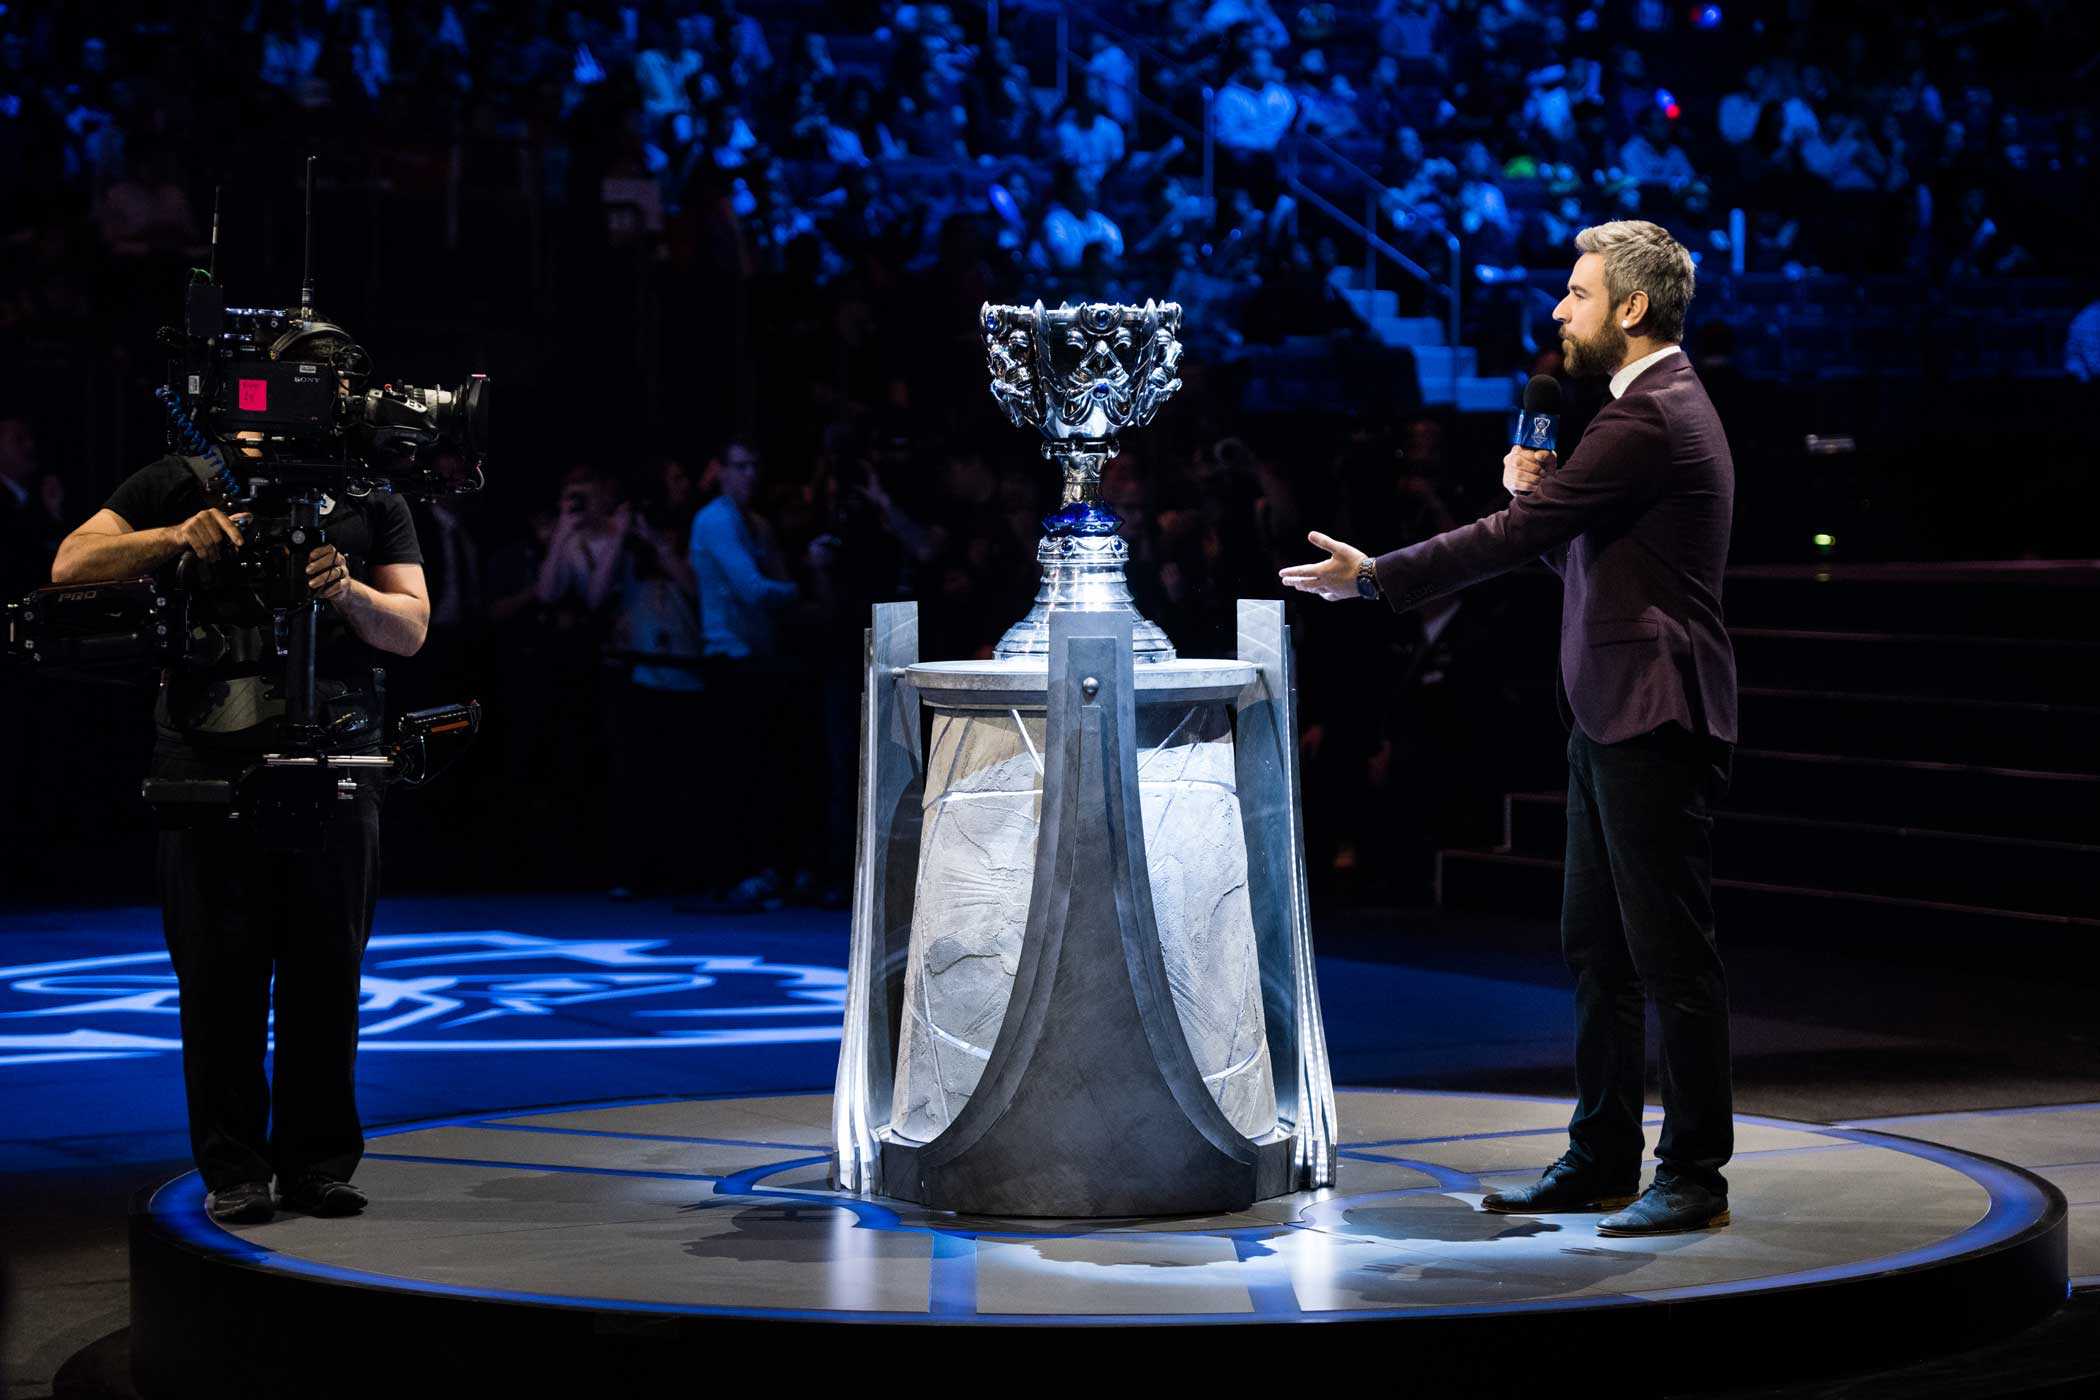 Rivington Bisland III, the emcee, speaks in front of the trophy. Rivington, as he's known in-game, has one of the longest eSports commentating careers, going back to 2000 for other organizations.